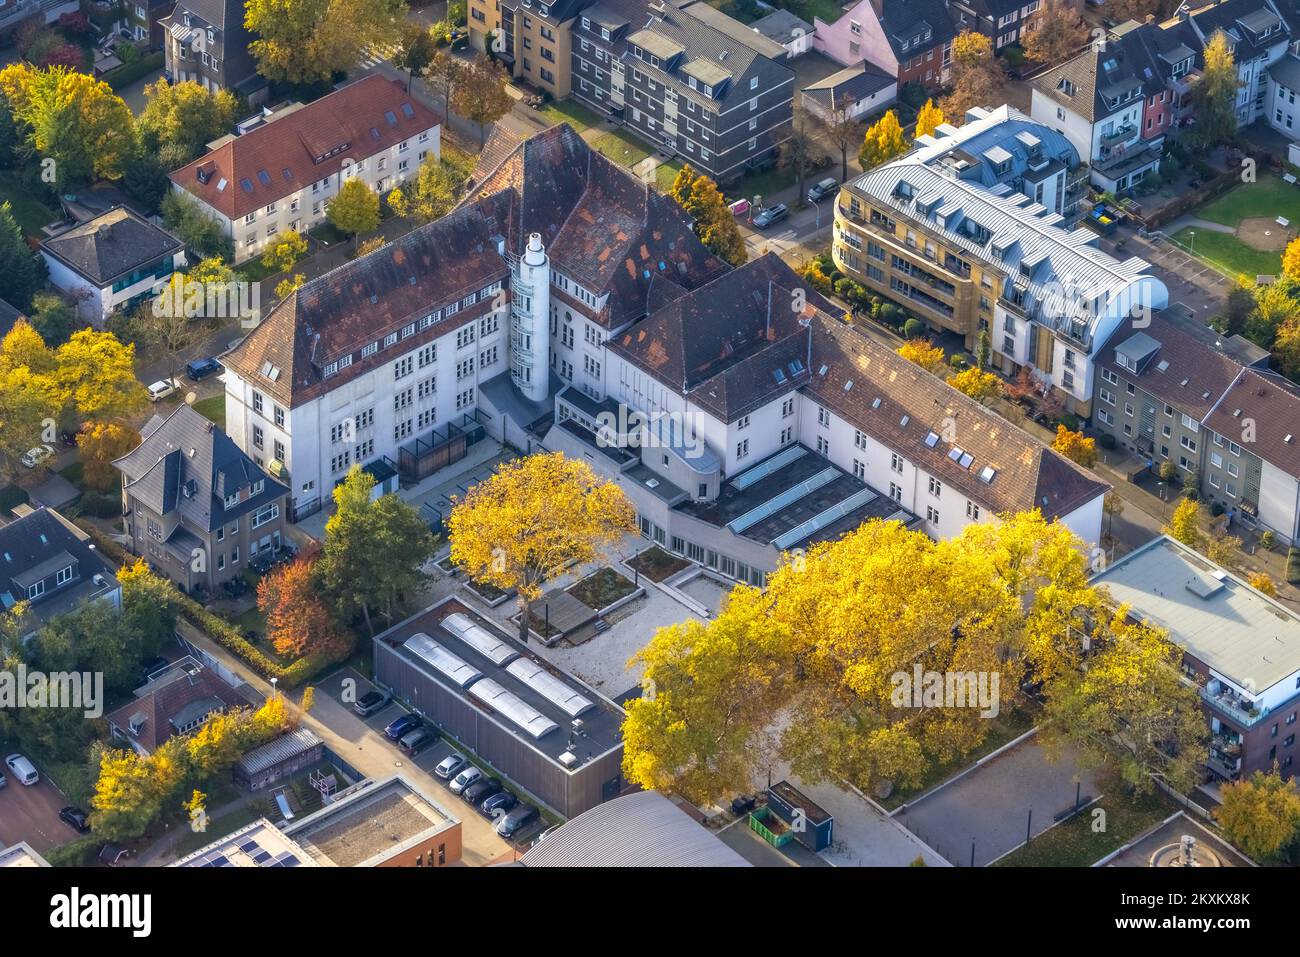 Aerial view, VHS Bottrop, cultural center, old town, Bottrop, Ruhr area, North Rhine-Westphalia, Germany, DE, Europe, August Everding Cultural Center, Stock Photo